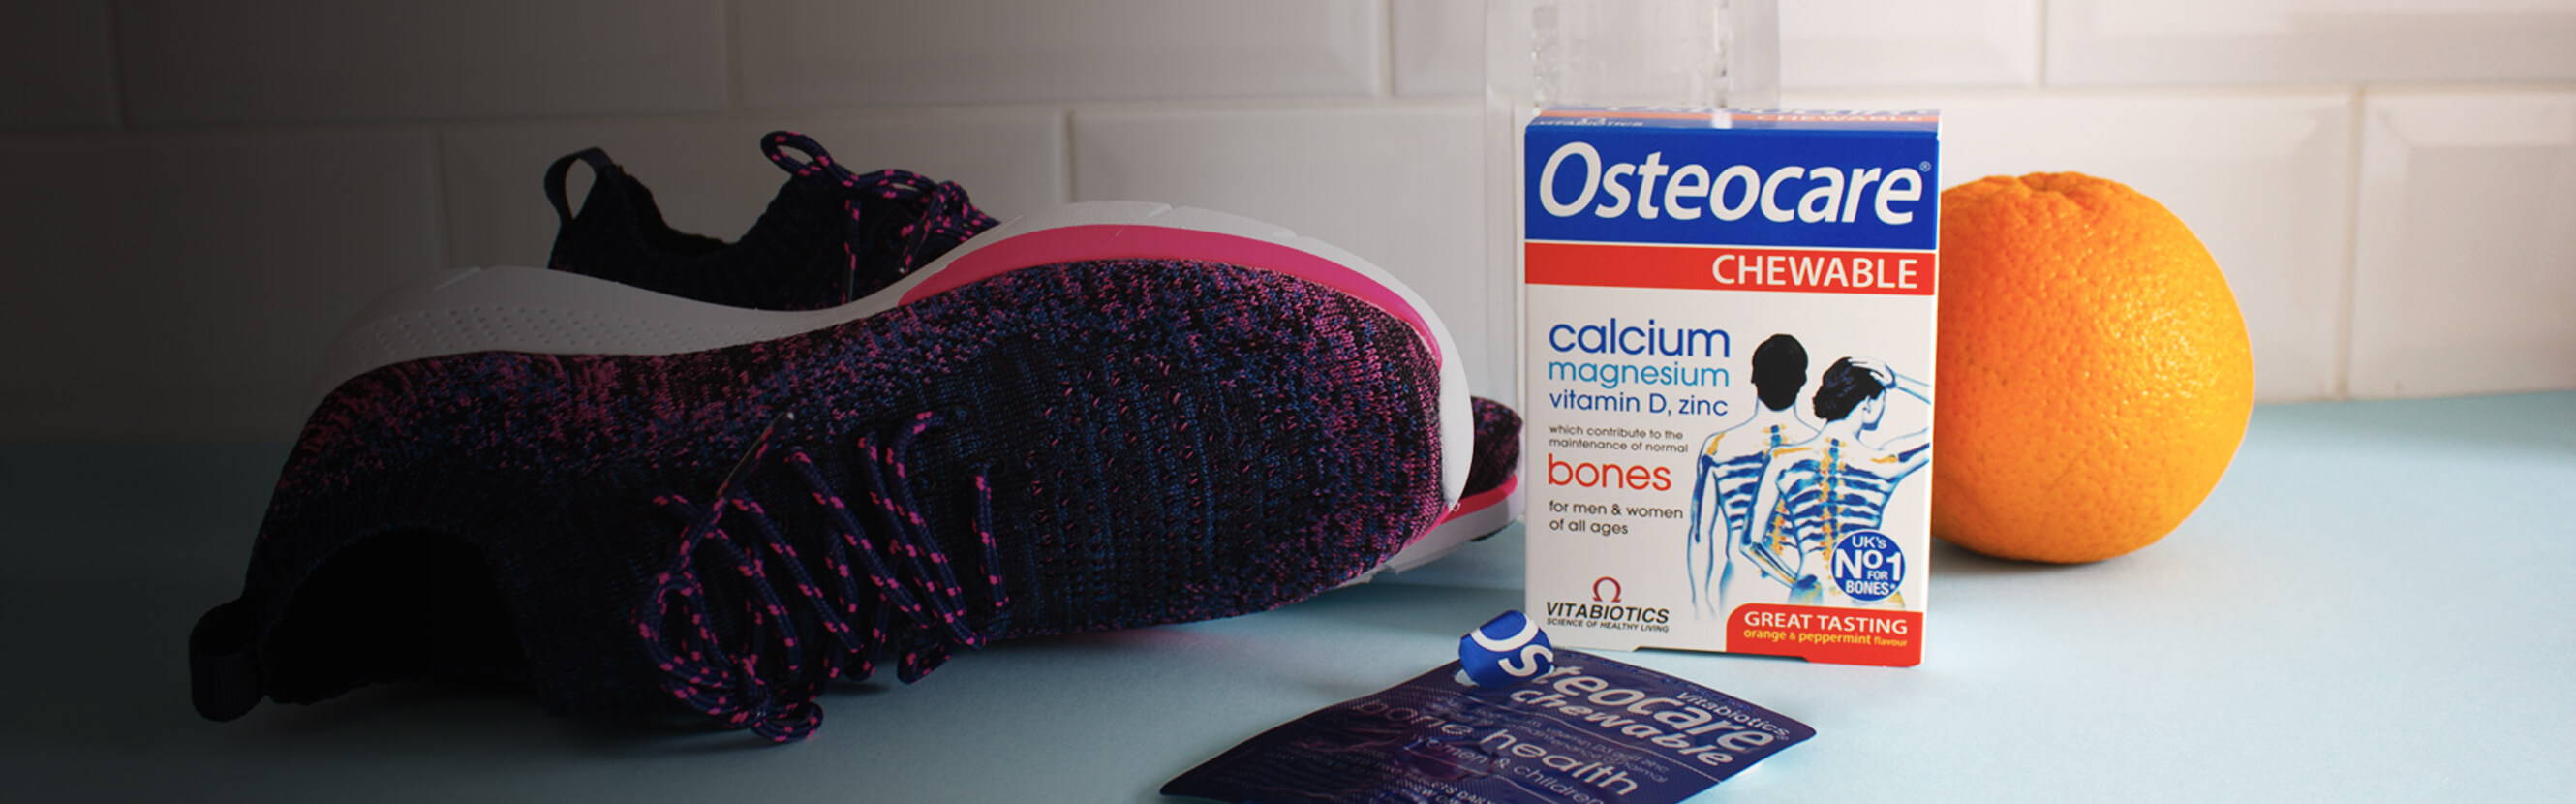  From childhood to later in life, from pregnancy to post-menopause, calcium is critical. If you’re concerned about the gaps in your diet, Osteocare Chewable’s innovative formula is a rich source of calcium, magnesium, vitamin D and zinc which all contribute to the maintenance of normal bones.  